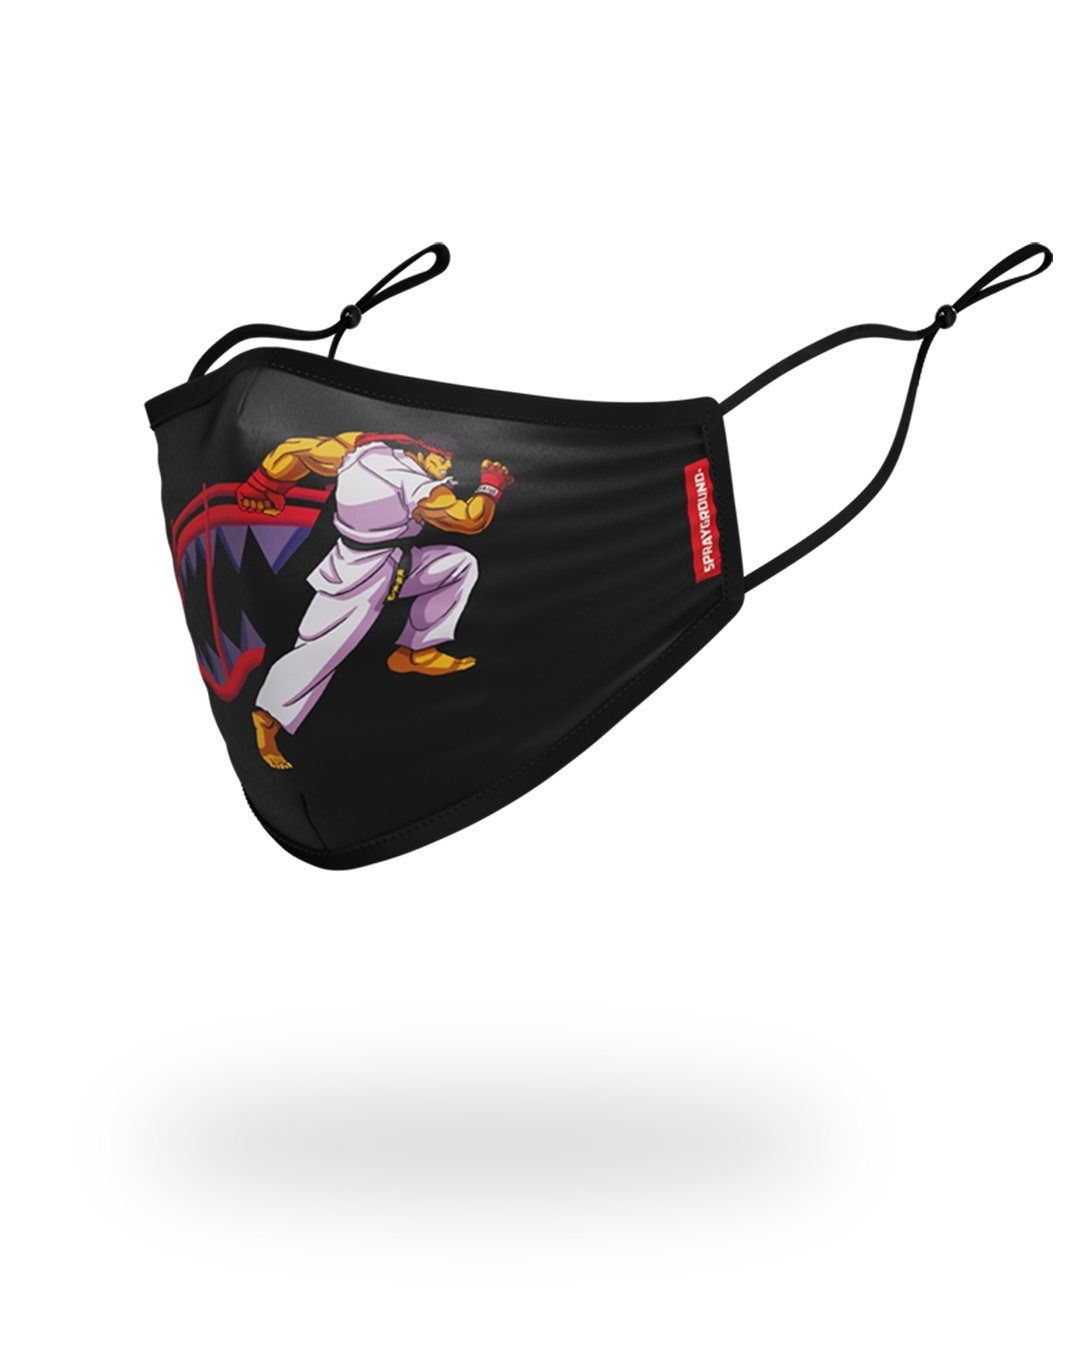 Discount | Adult Street Fighter Ryu Shark Form Fitting Face-Covering Sprayground Sale - Discount | Adult Street Fighter Ryu Shark Form Fitting Face-Covering Sprayground Sale-01-1